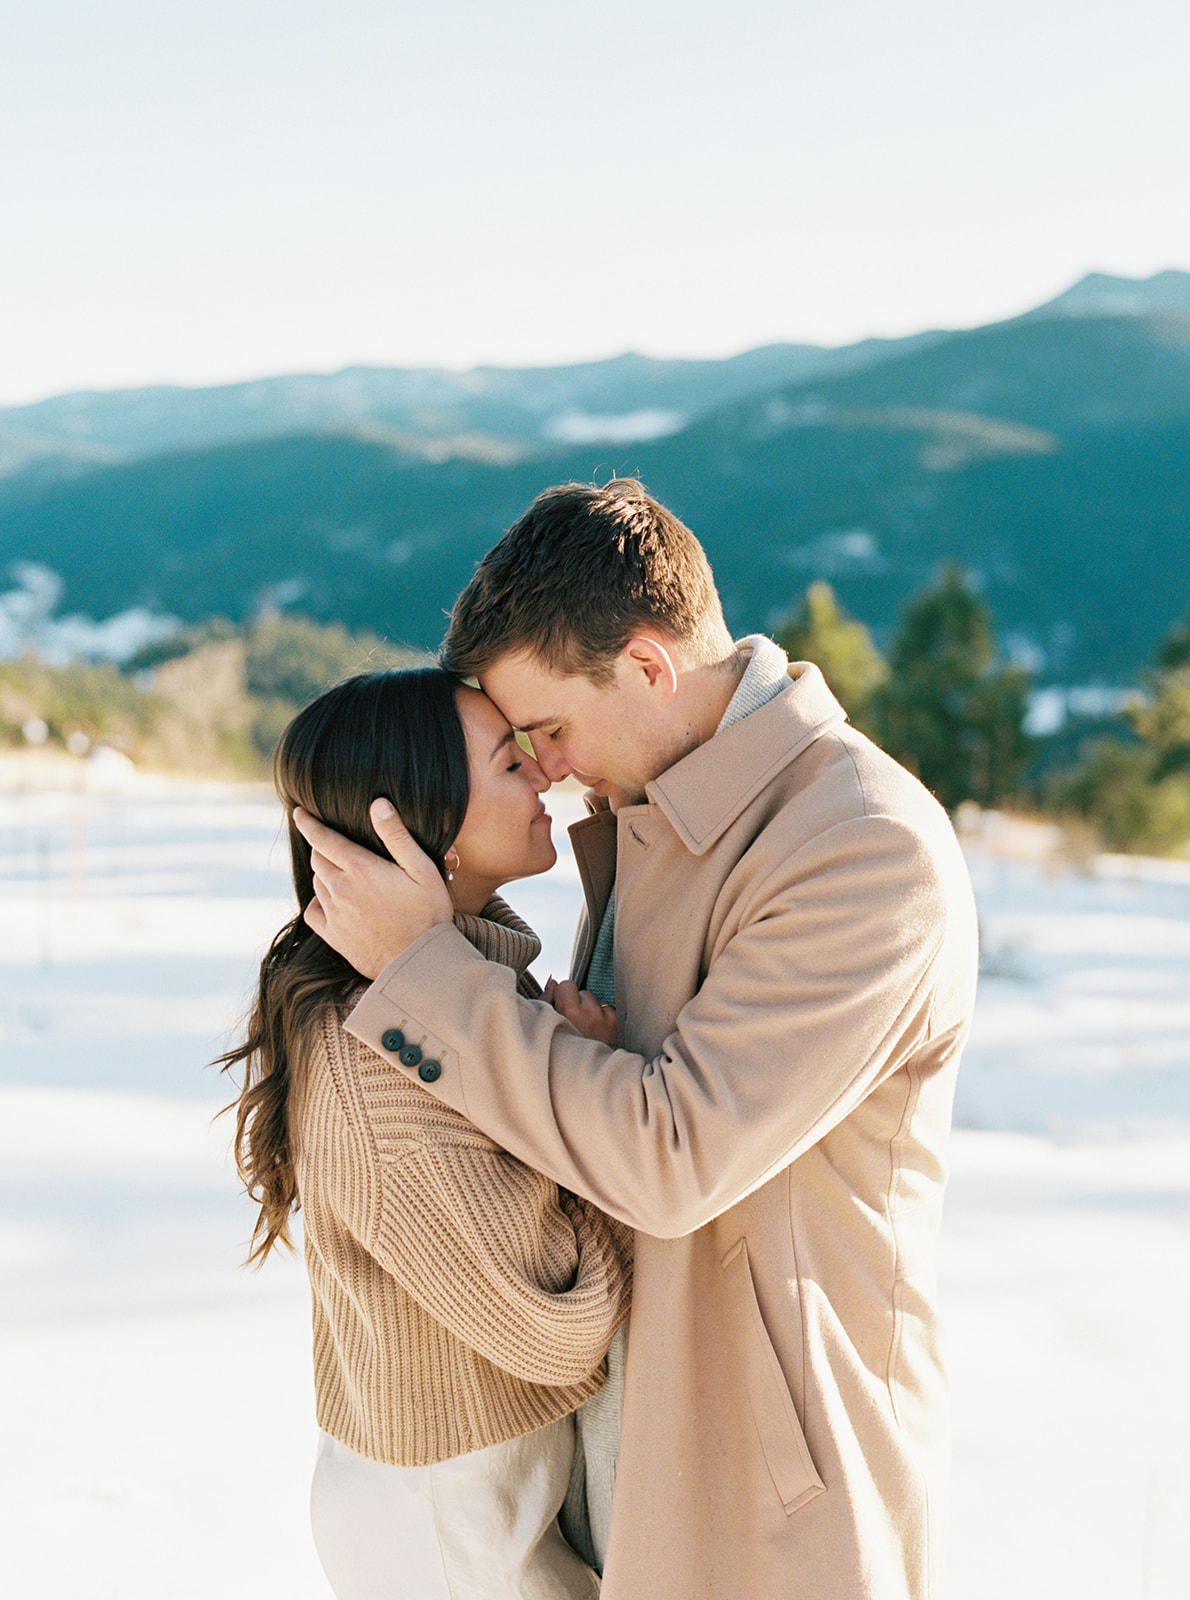 An engagement photo of a couple in love, standing in a winter wonderland with the breathtaking Front Range Mountains in the distance.